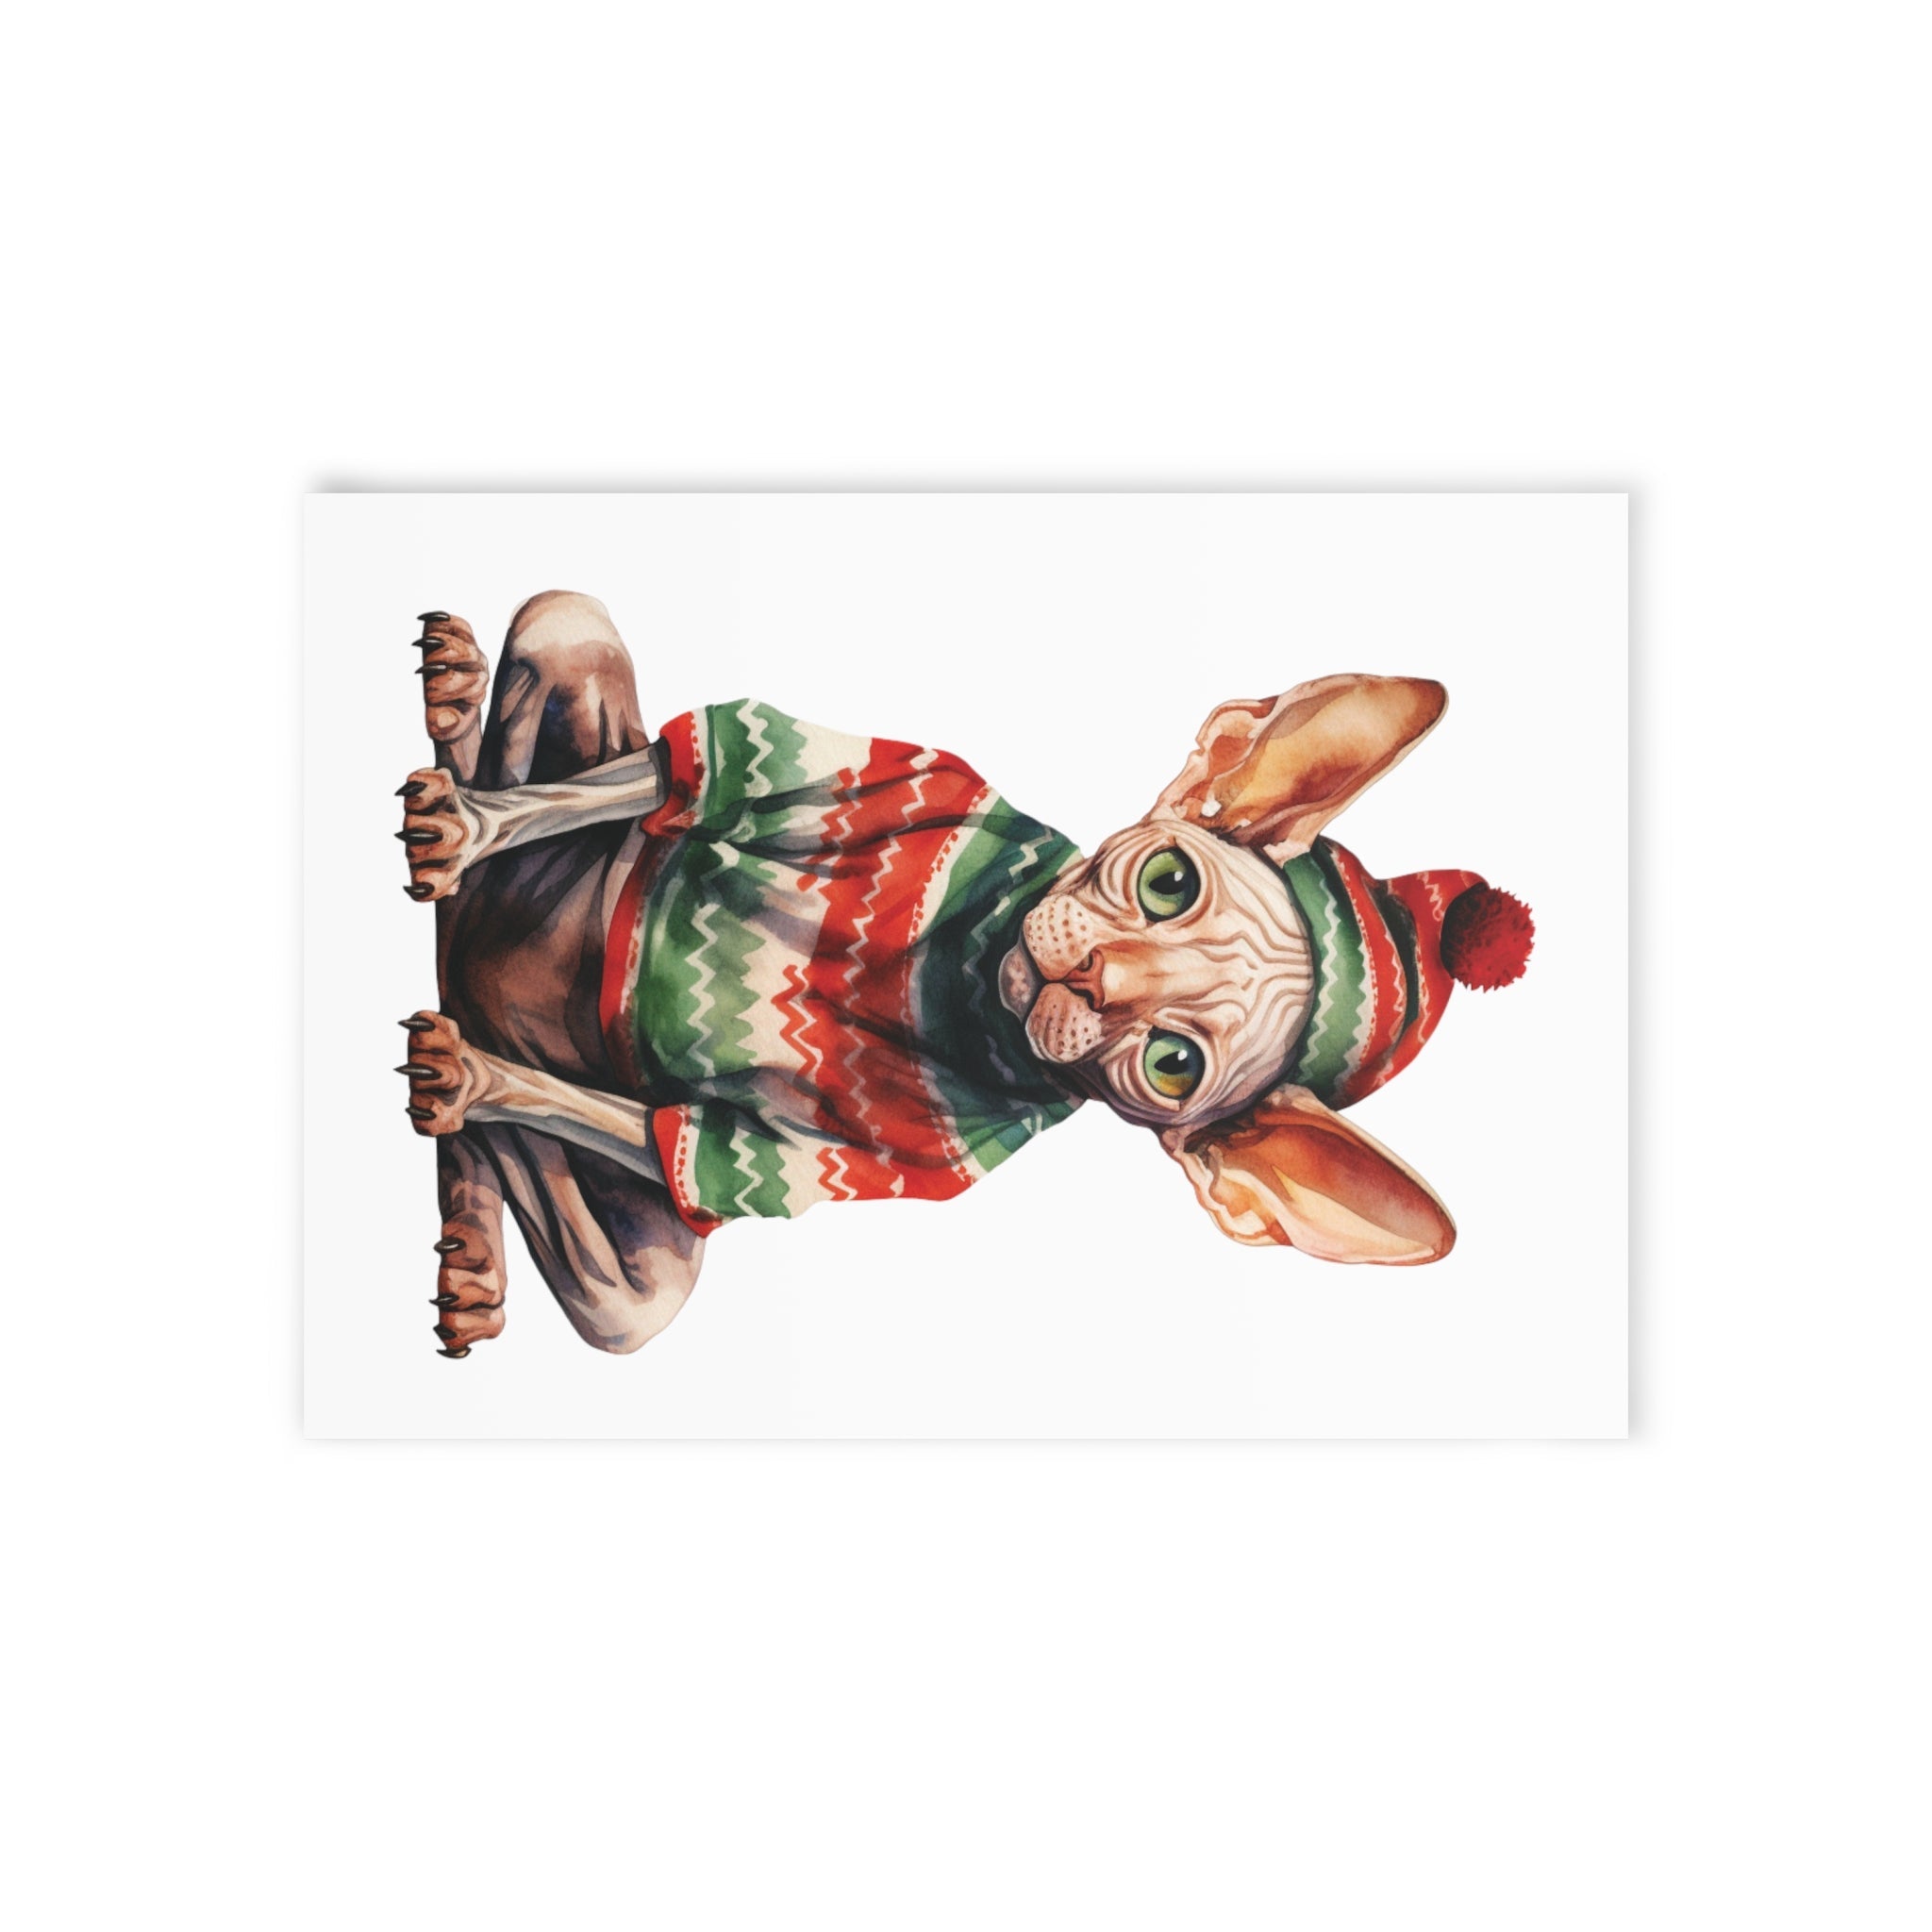 Sphynx, Christmas Cat - One-Sided Greeting Card/Art Print with Envelope, 300gsm FSC-Certified